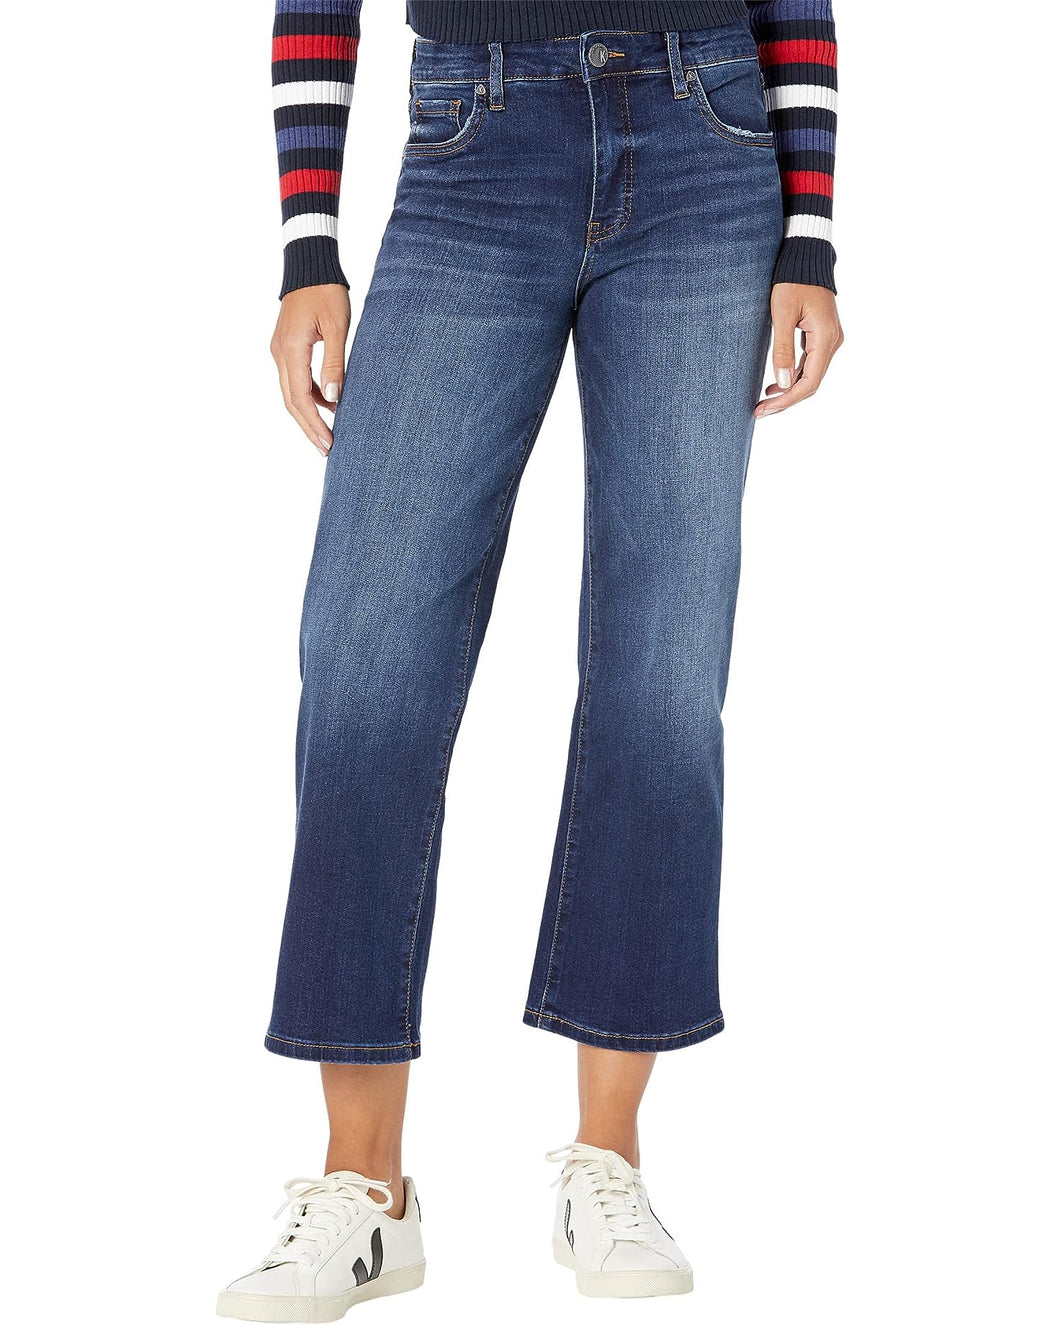 KUT Charlotte High Rise Jeans in Resolve